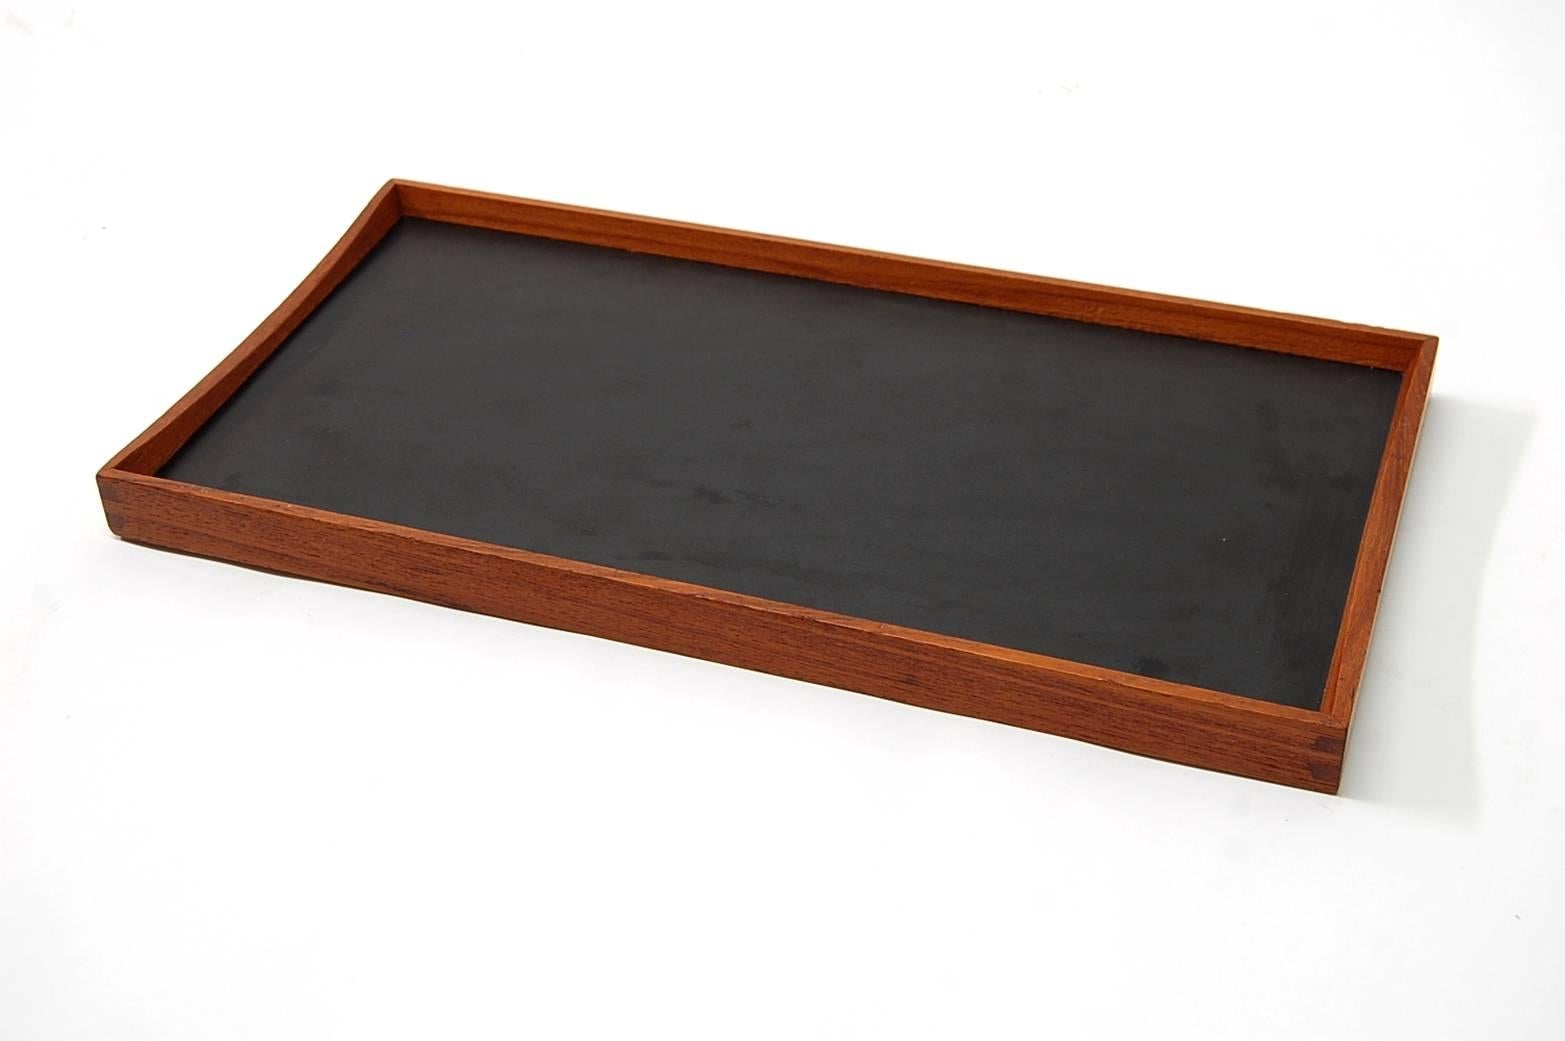 Finn Juhl designed this useful tray in 1957 for Torben Ørskov, of Denmark. Their frames are beautifully joined teak, while their working surfaces are in melamine, one face is a vibrant red, the other (reversibly) black. The profile of the teak frame